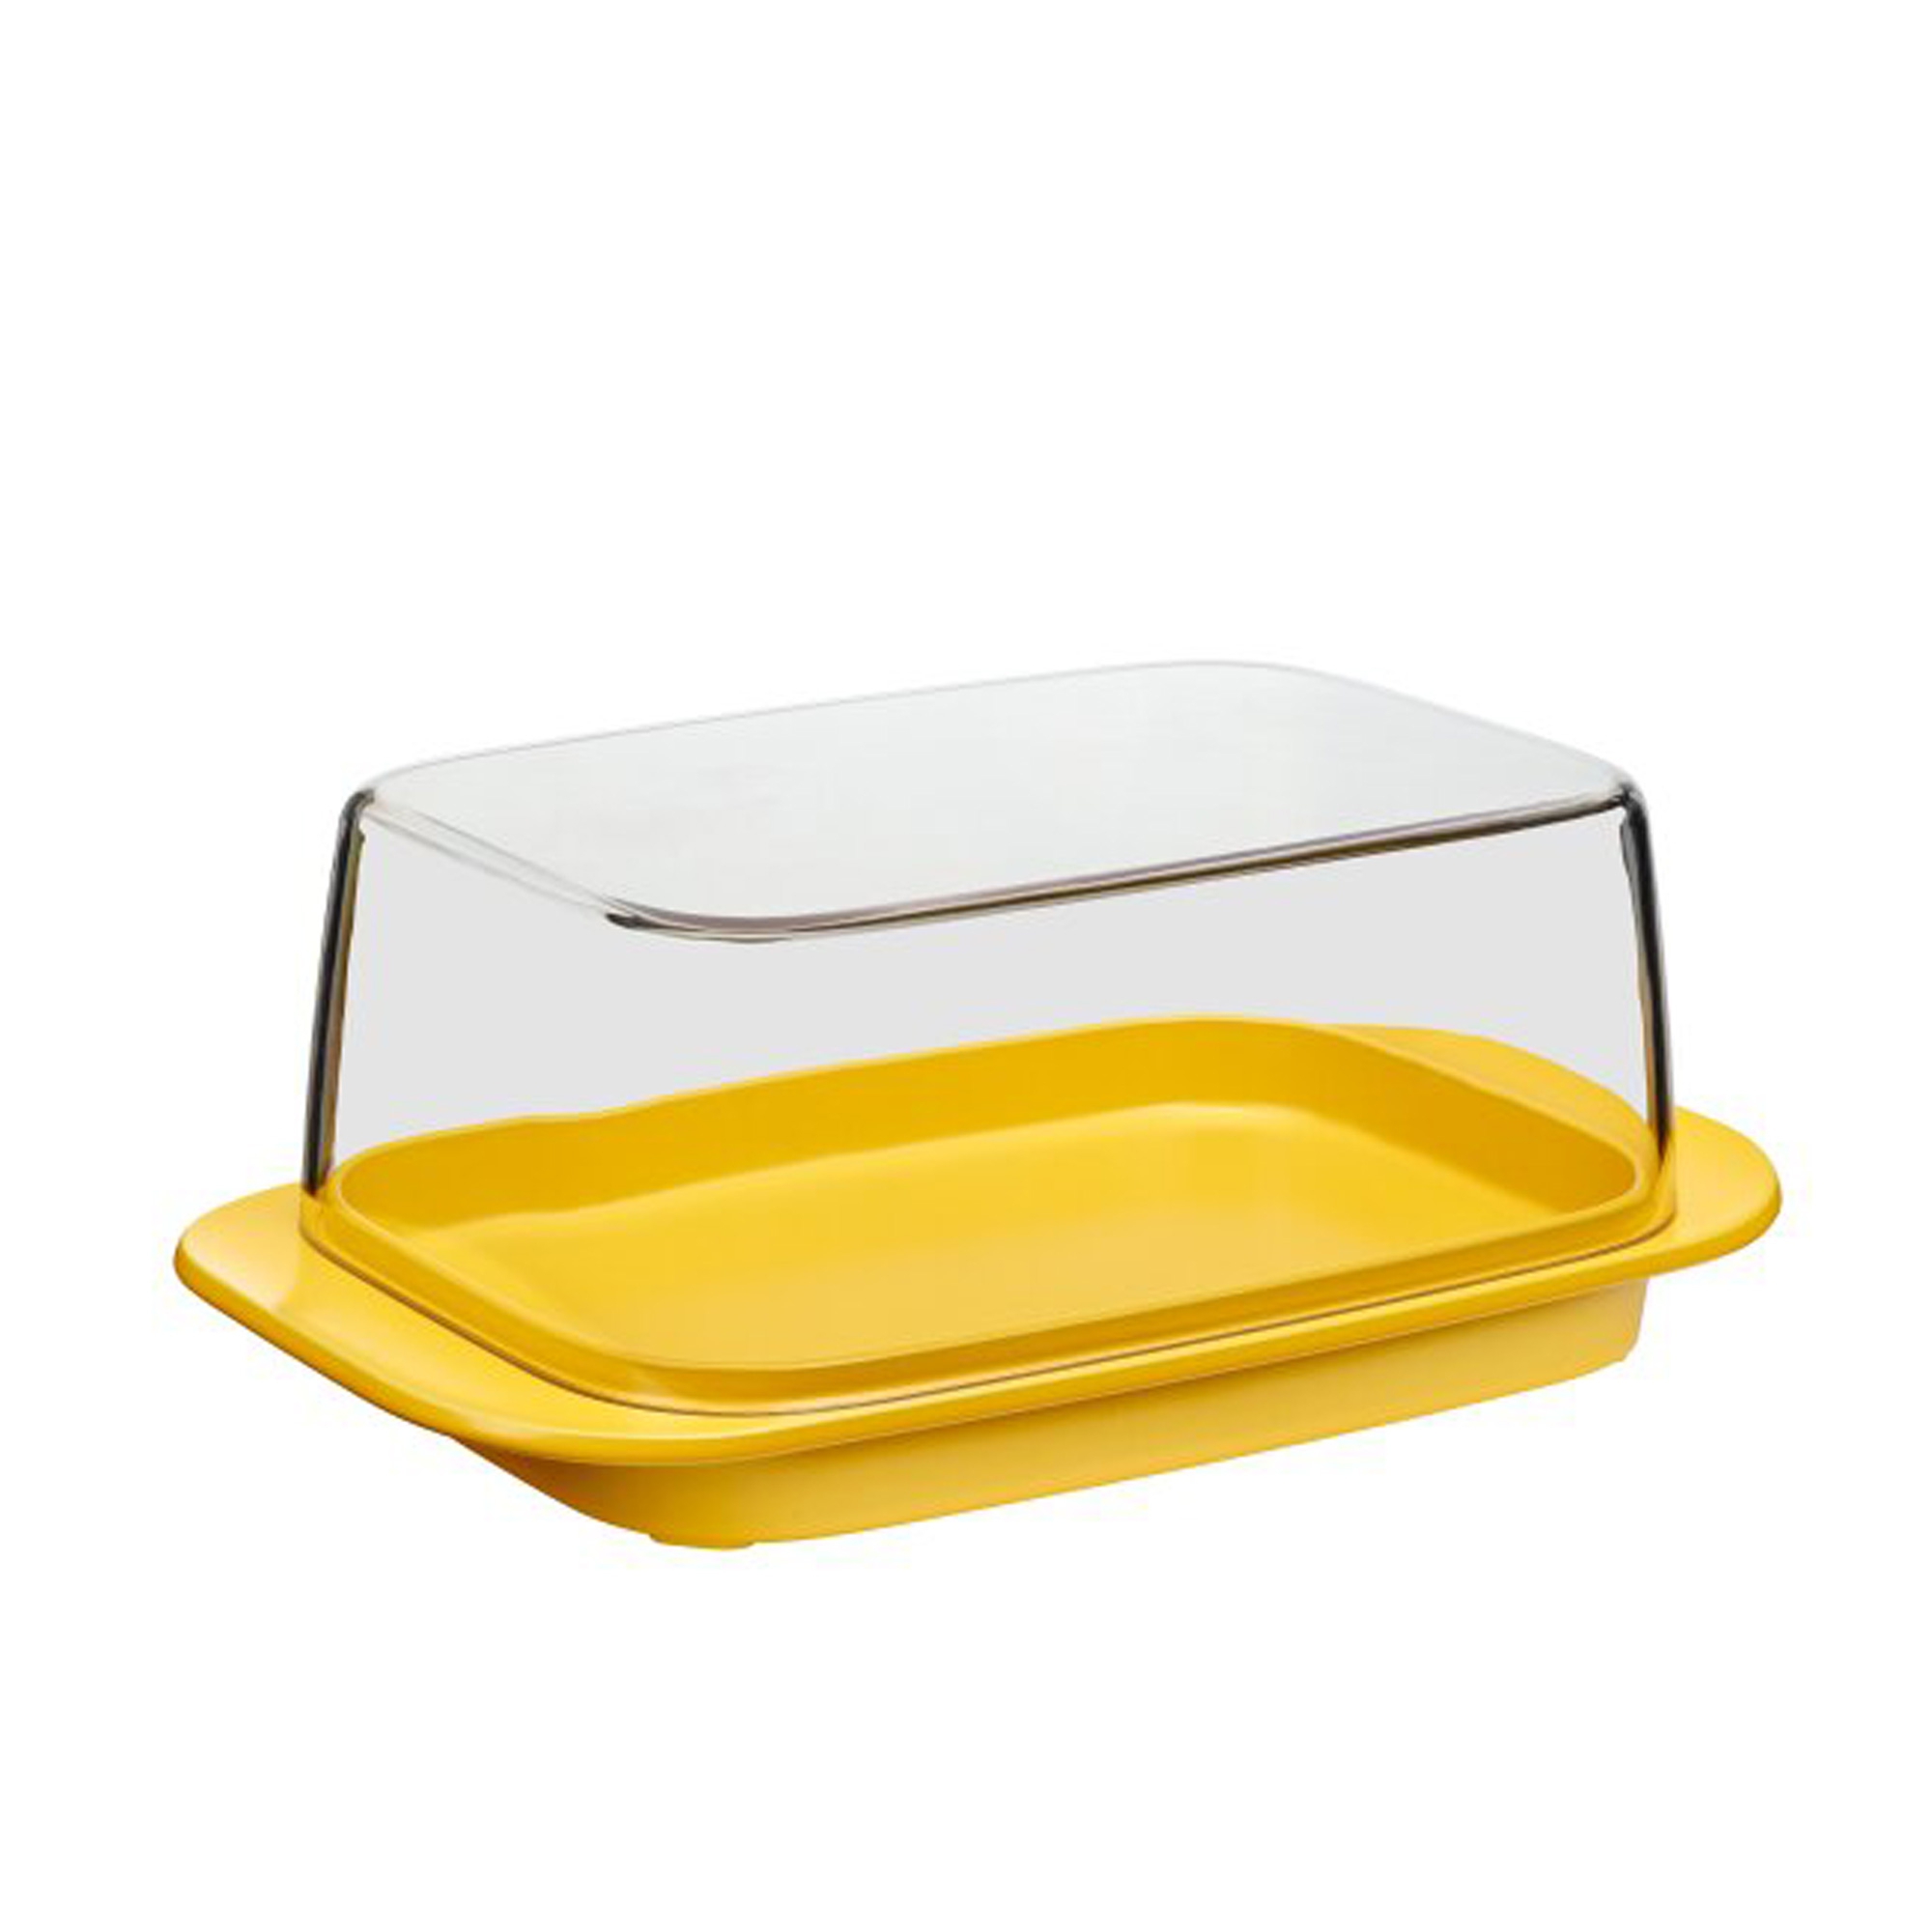 Mepal - butter dish 350 gr. - different colors